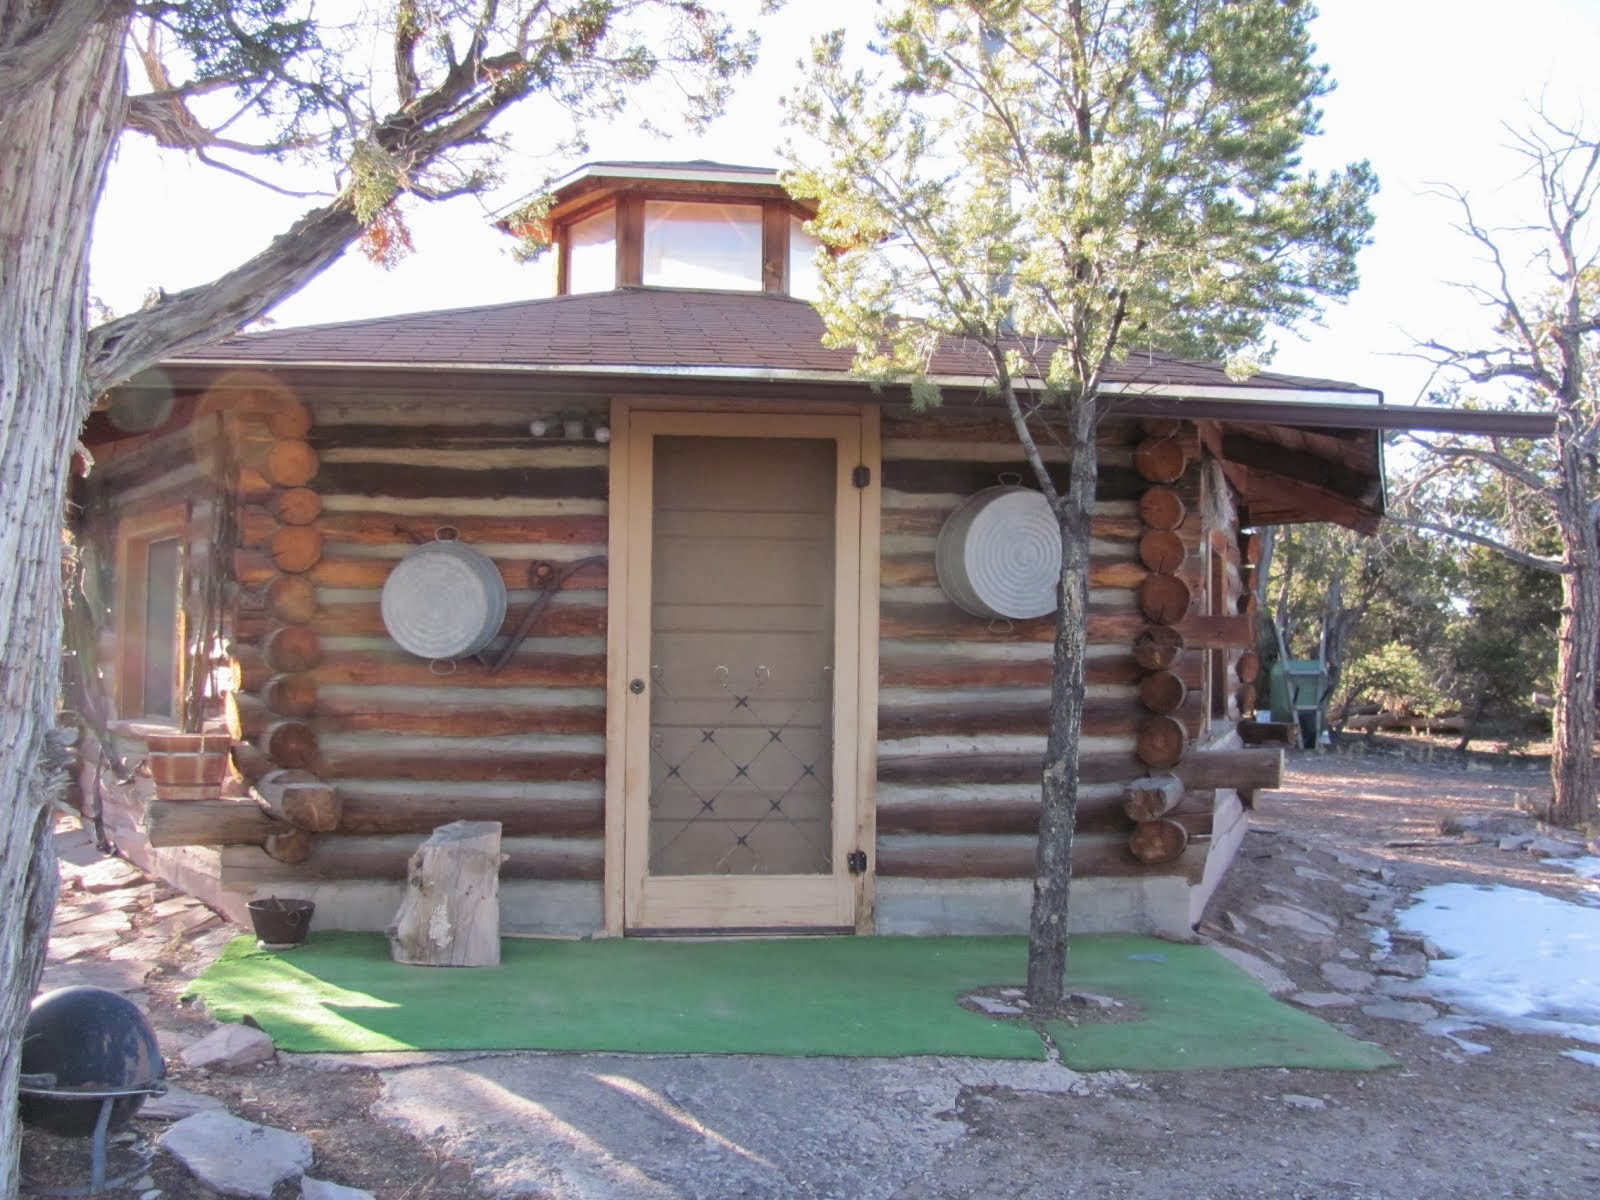 Ted & Evie's traditional navajo hogan guest house